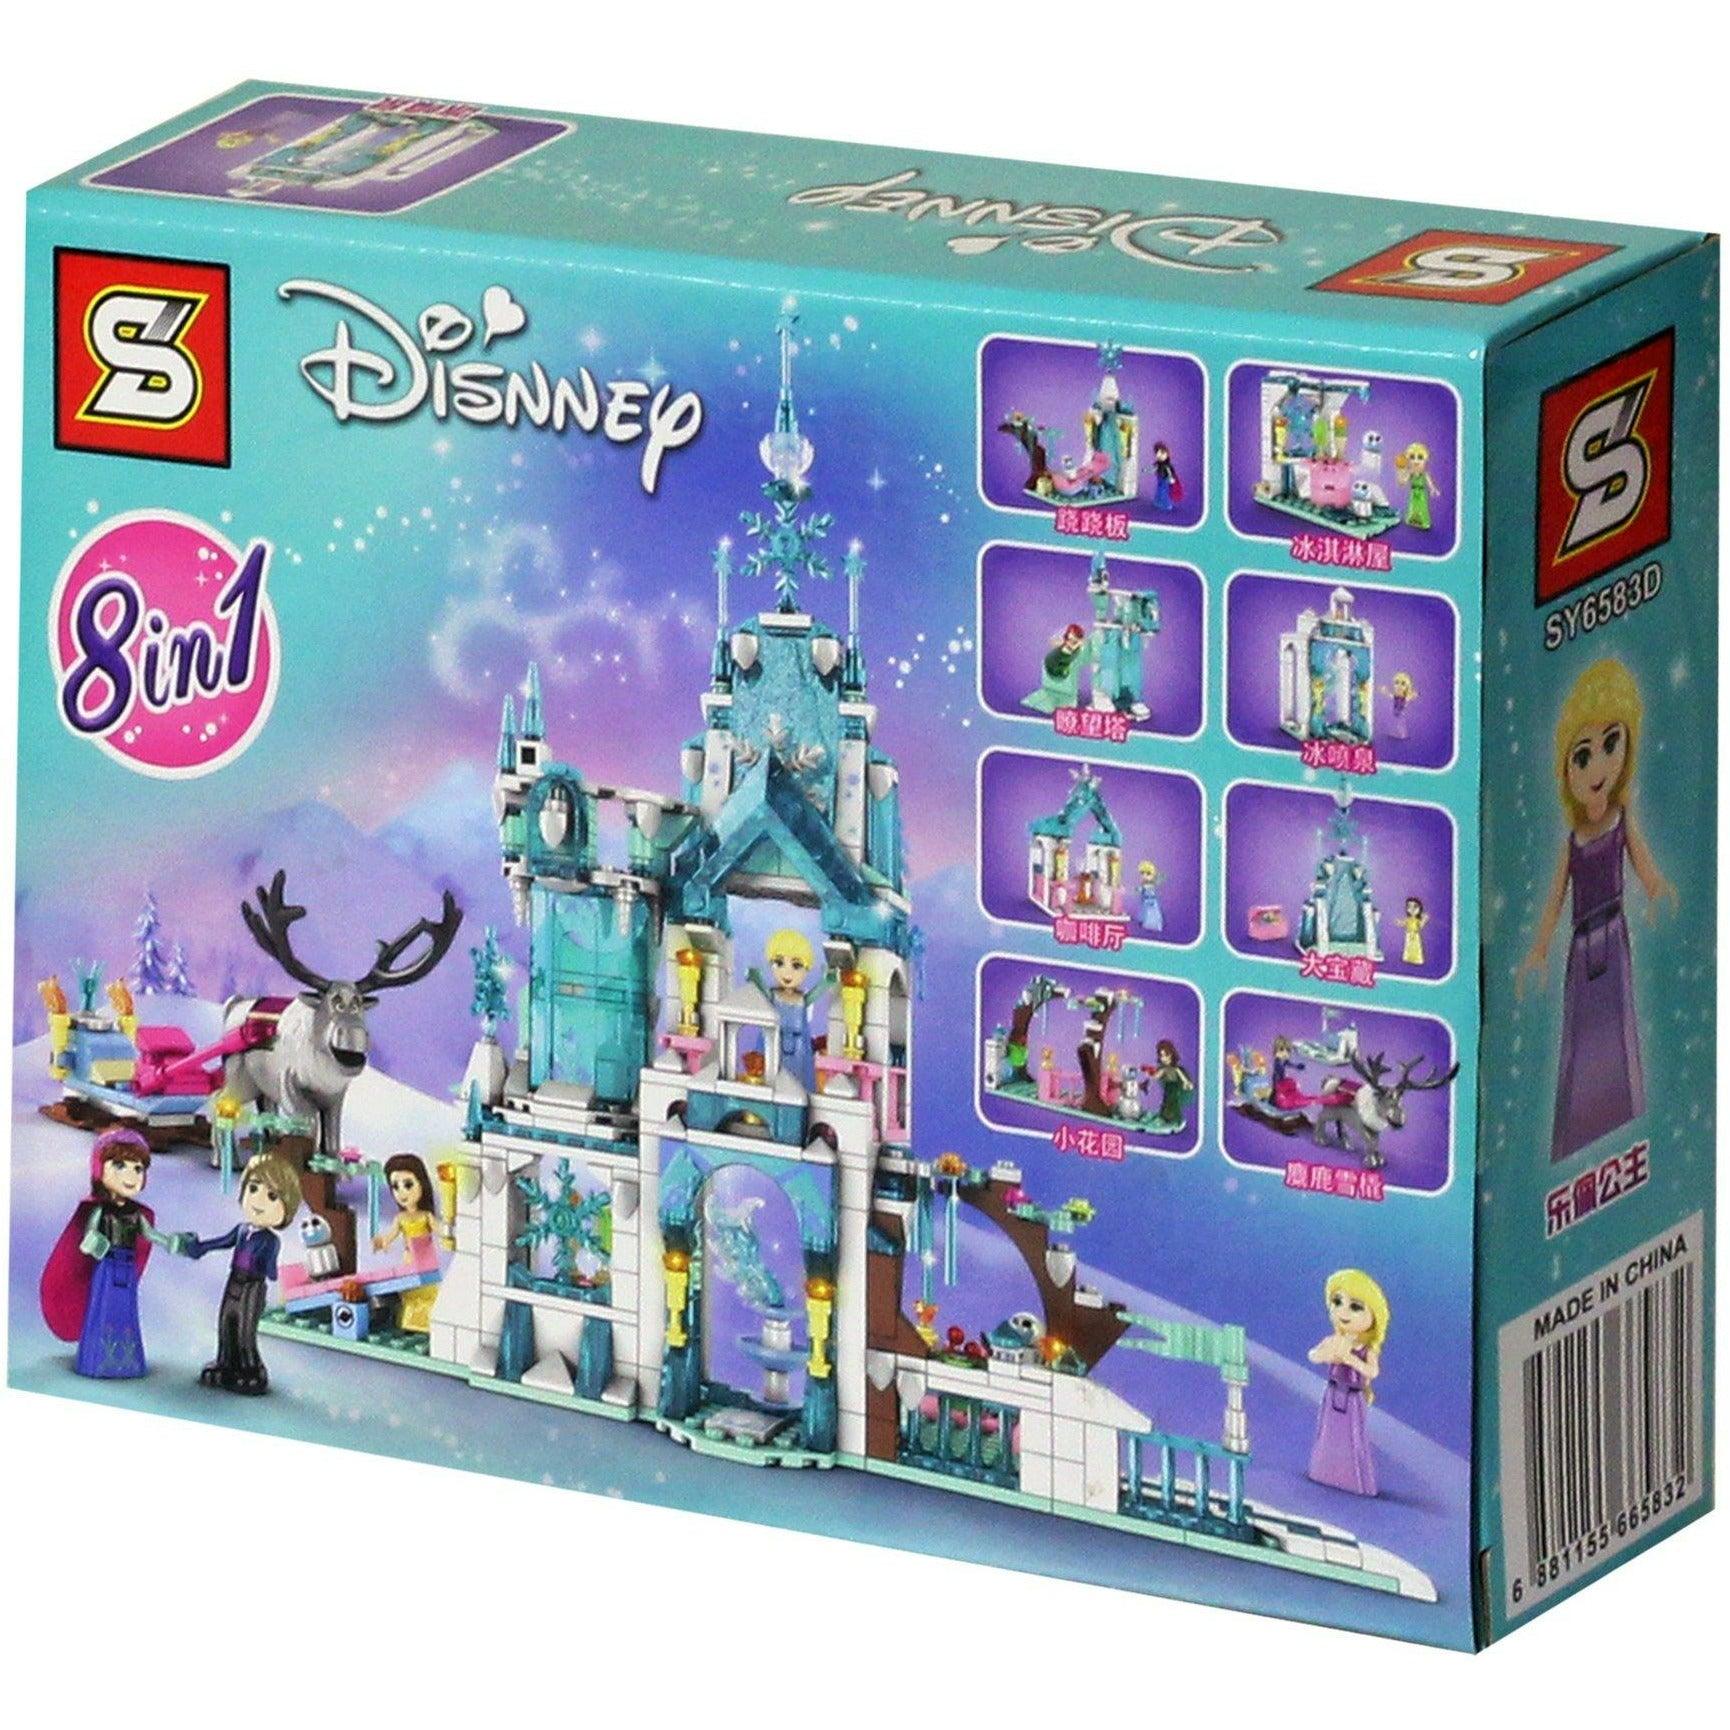 Frozen Snow Castle Building Blocks 83 Pieces 8 in1 - BumbleToys - 5-7 Years, Frozen, Girls, LEGO, Toy Land